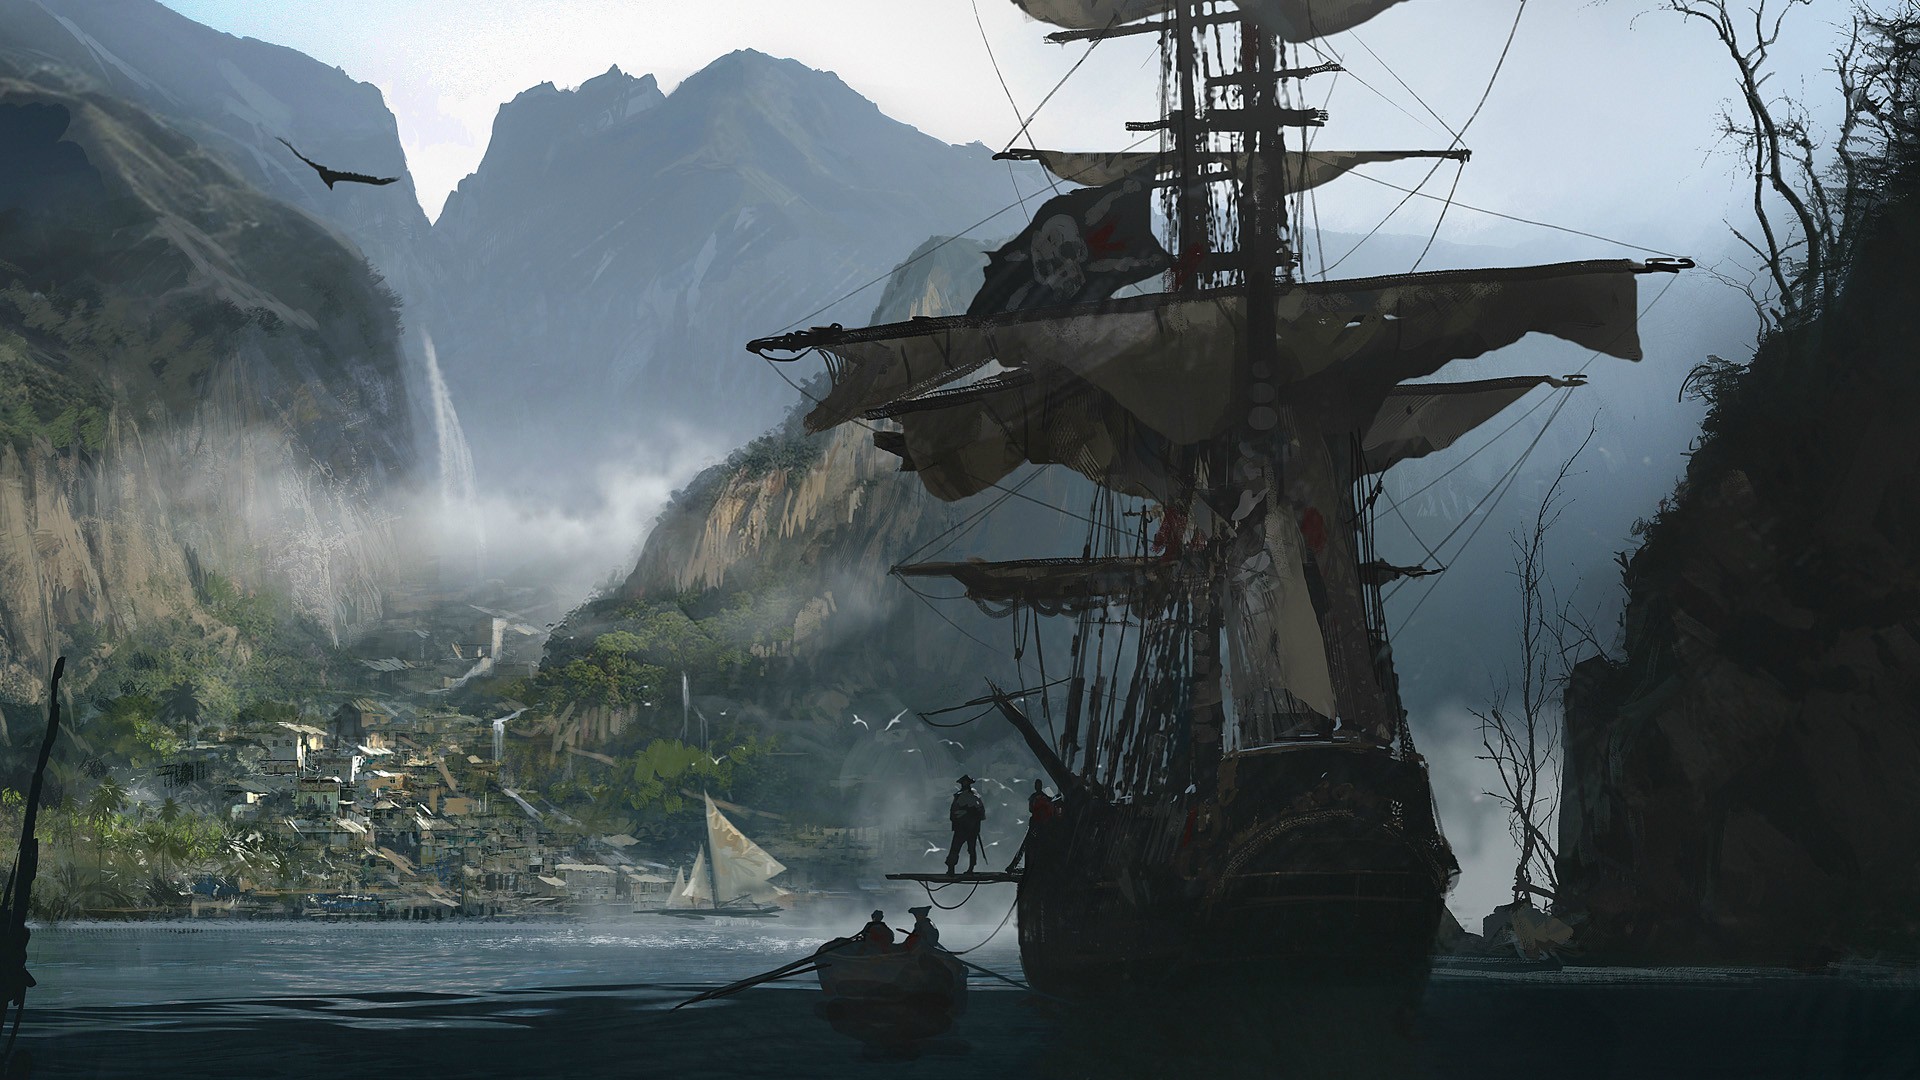 Free download wallpaper Assassin's Creed, Video Game, Assassin's Creed Iv: Black Flag on your PC desktop